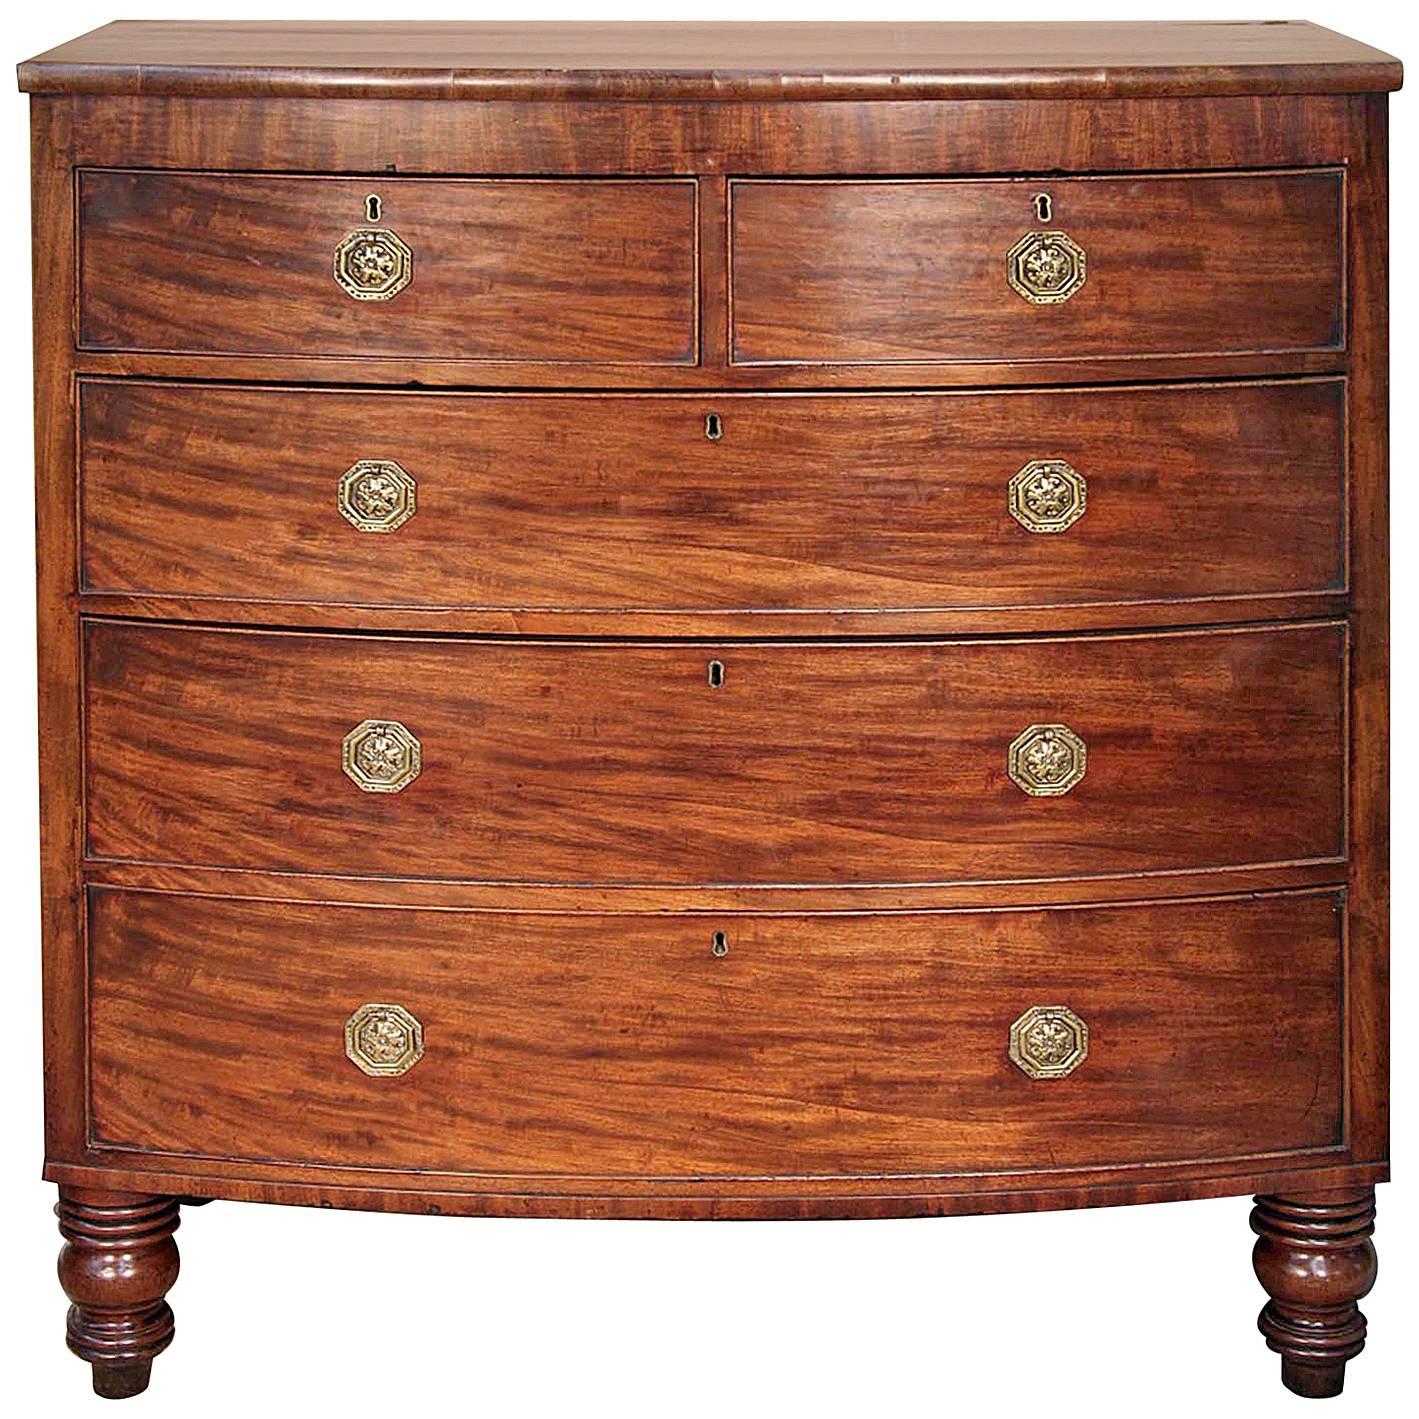 English Mahogany Bow Fronted Chest of Drawers For Sale